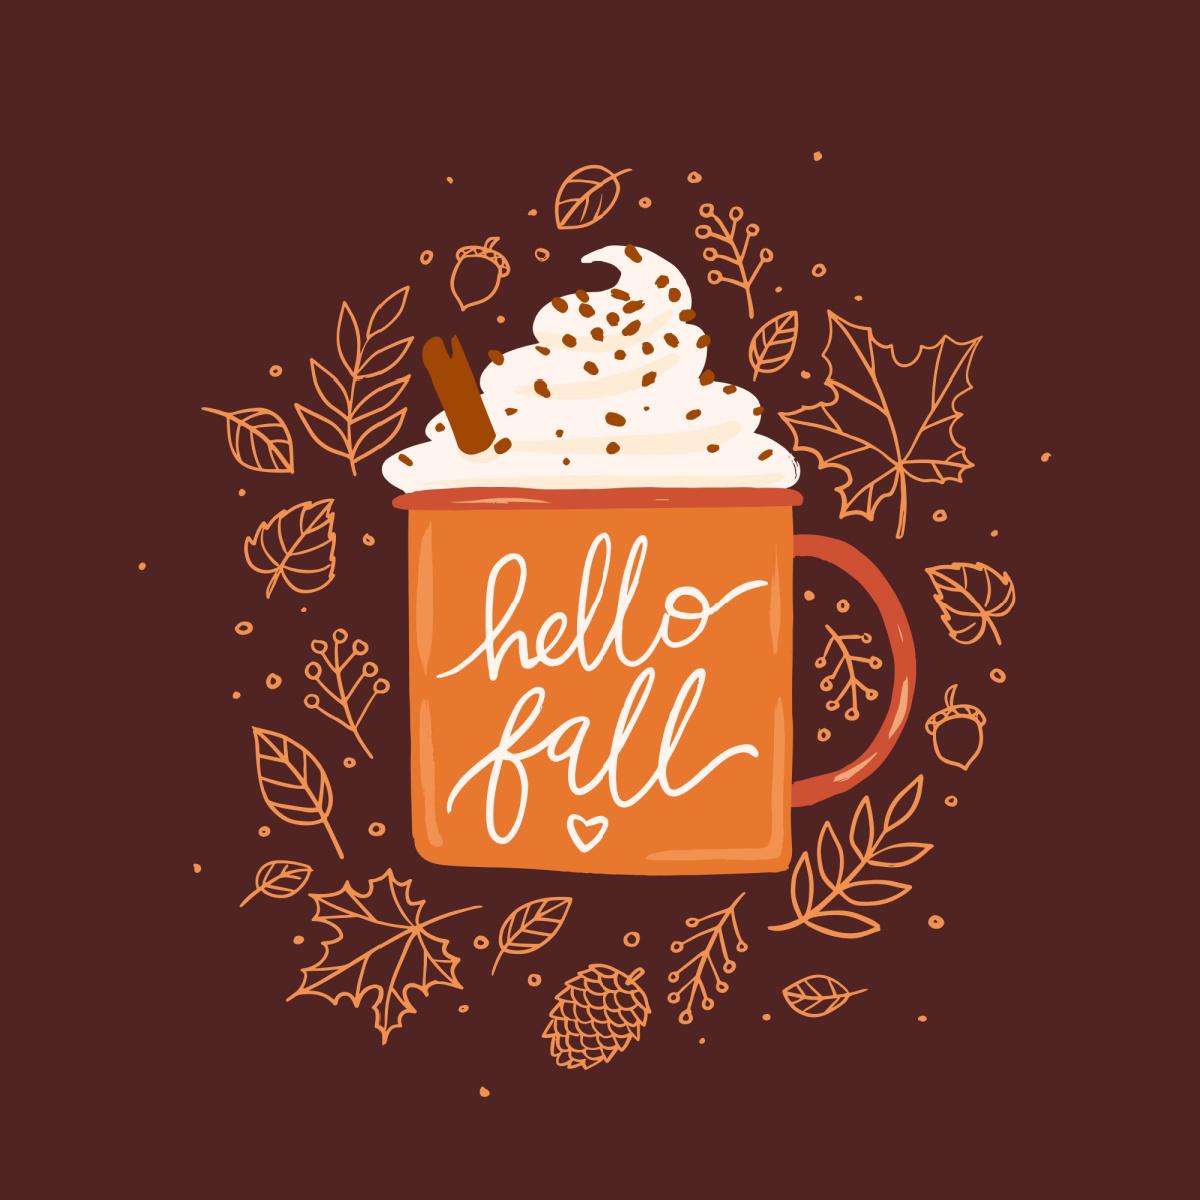 A cartoon image of an orange mug with the words "hello fall" written in cursive on it, with whipped cream and a cinnamon stick peeking out from the top, the whole image is on a brown background surrounded by leaf outlines.